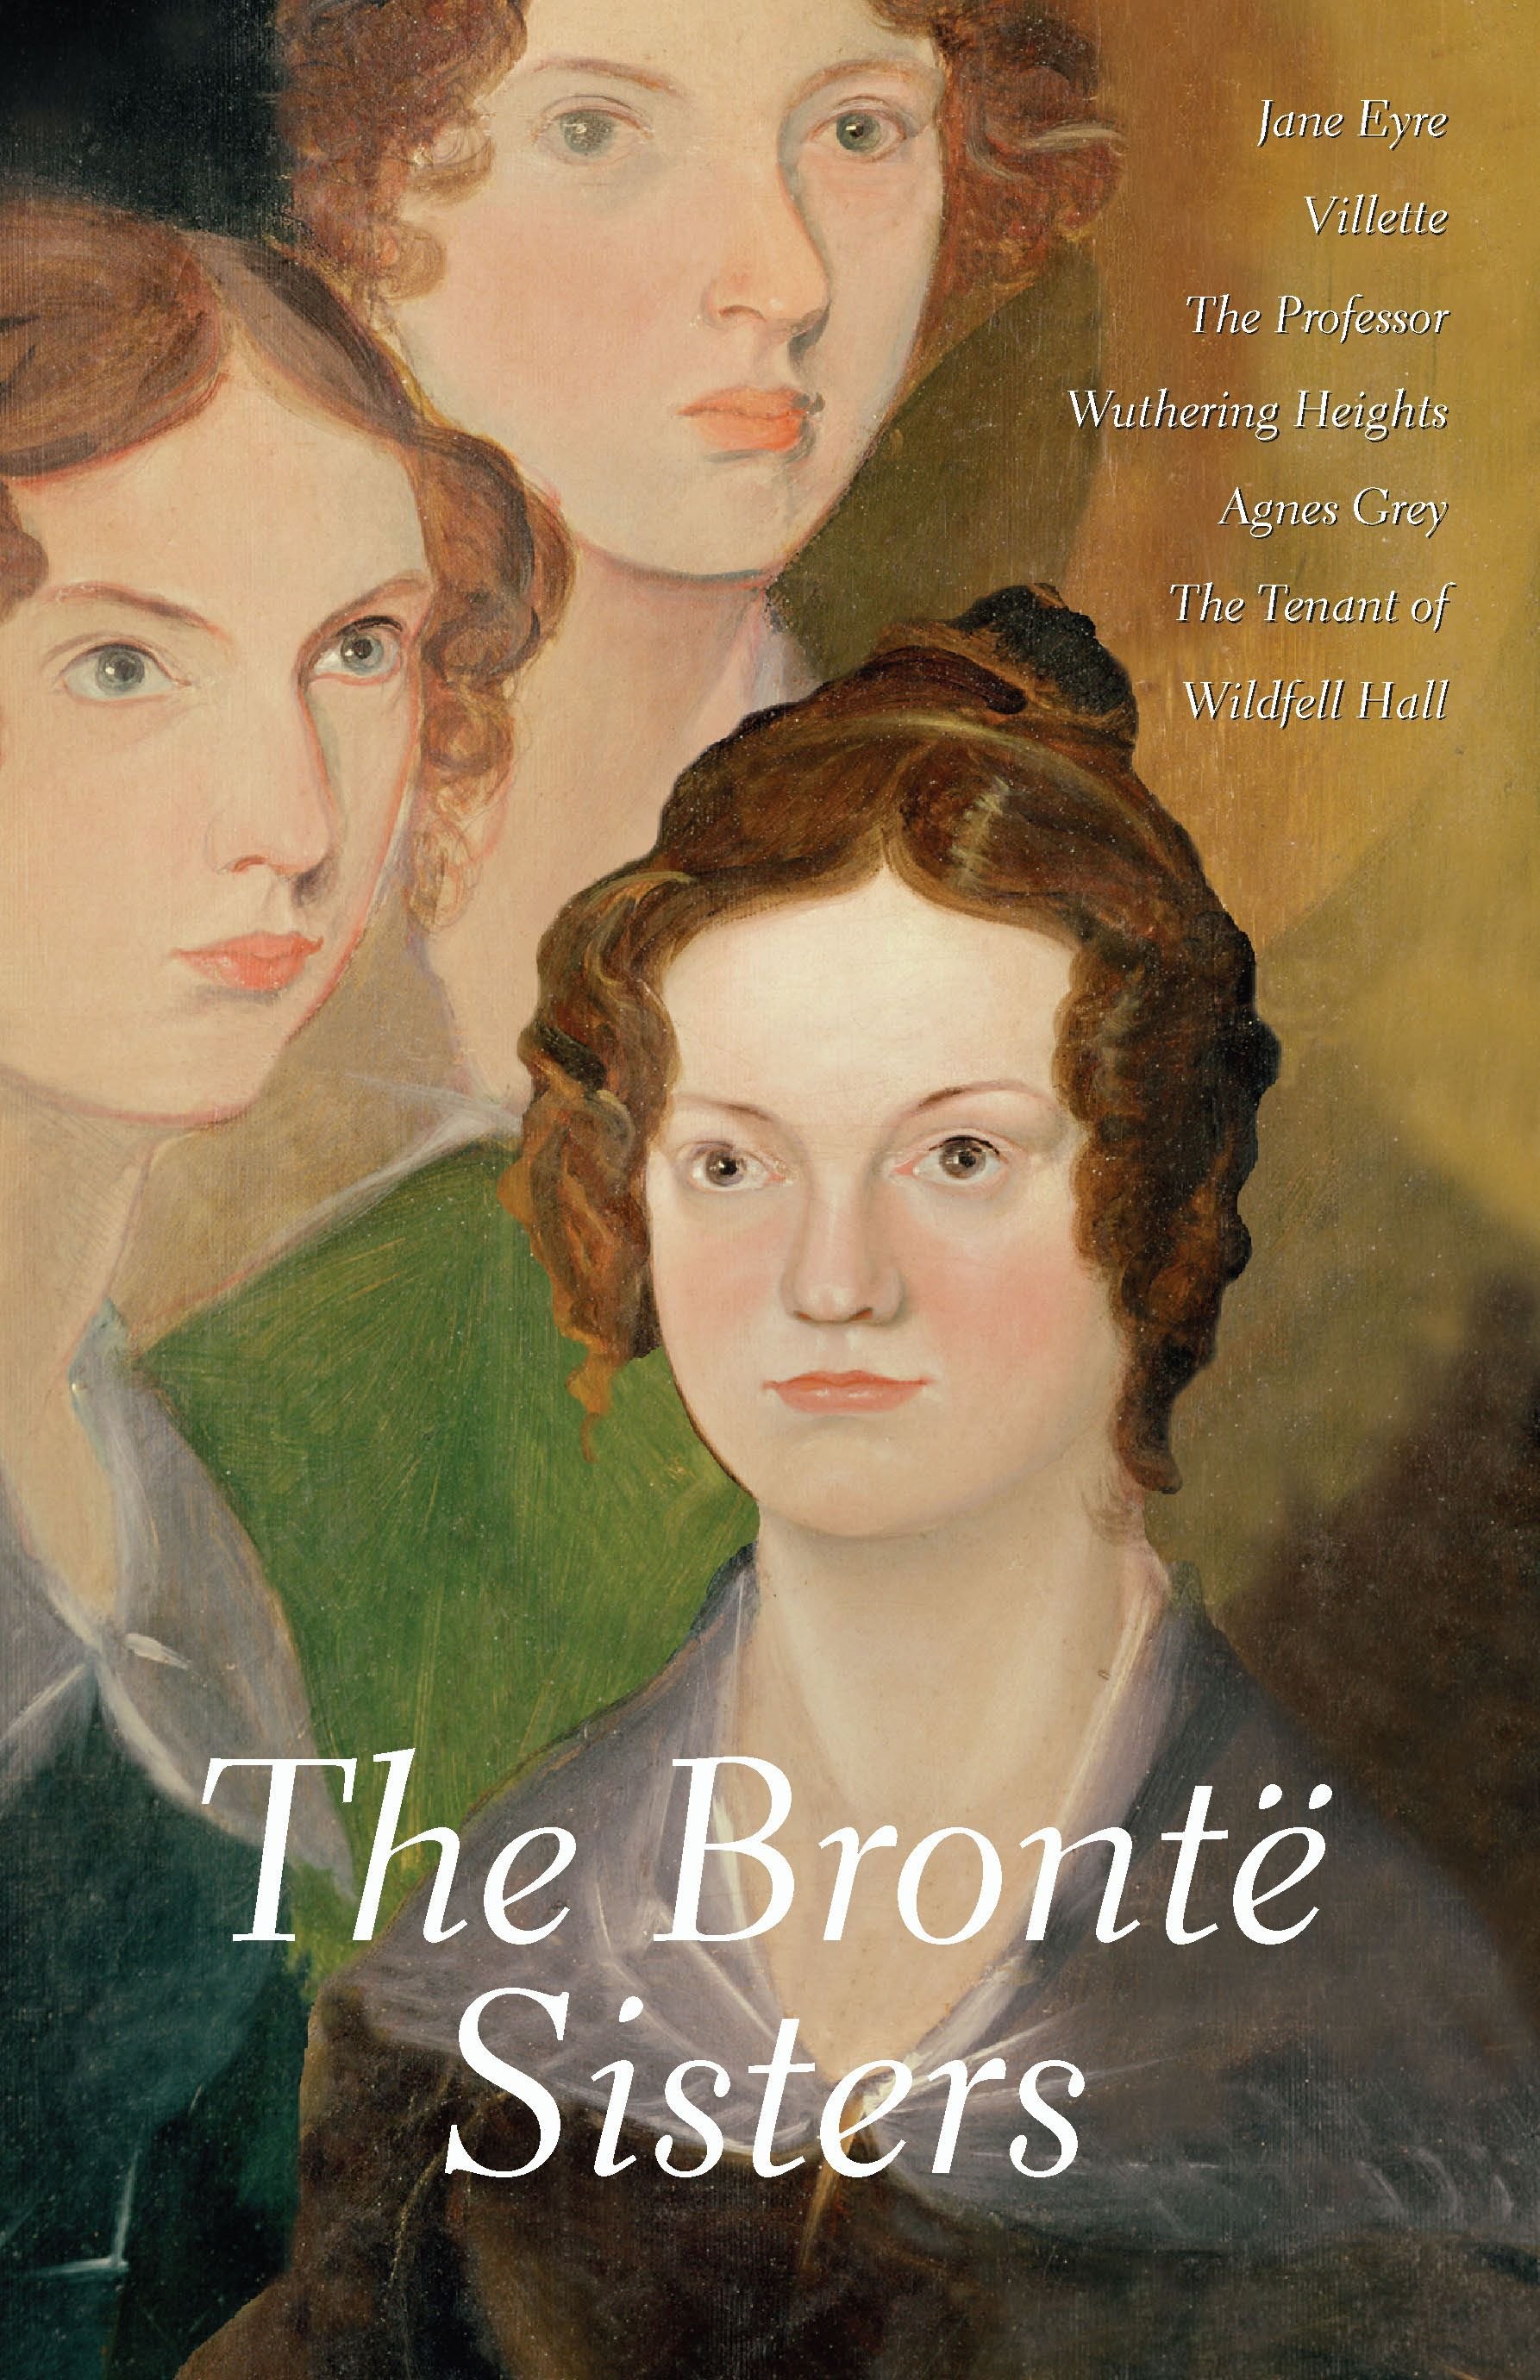 Buy The Bronte Sisters by Charlotte Bronte With Free Delivery | wordery.com